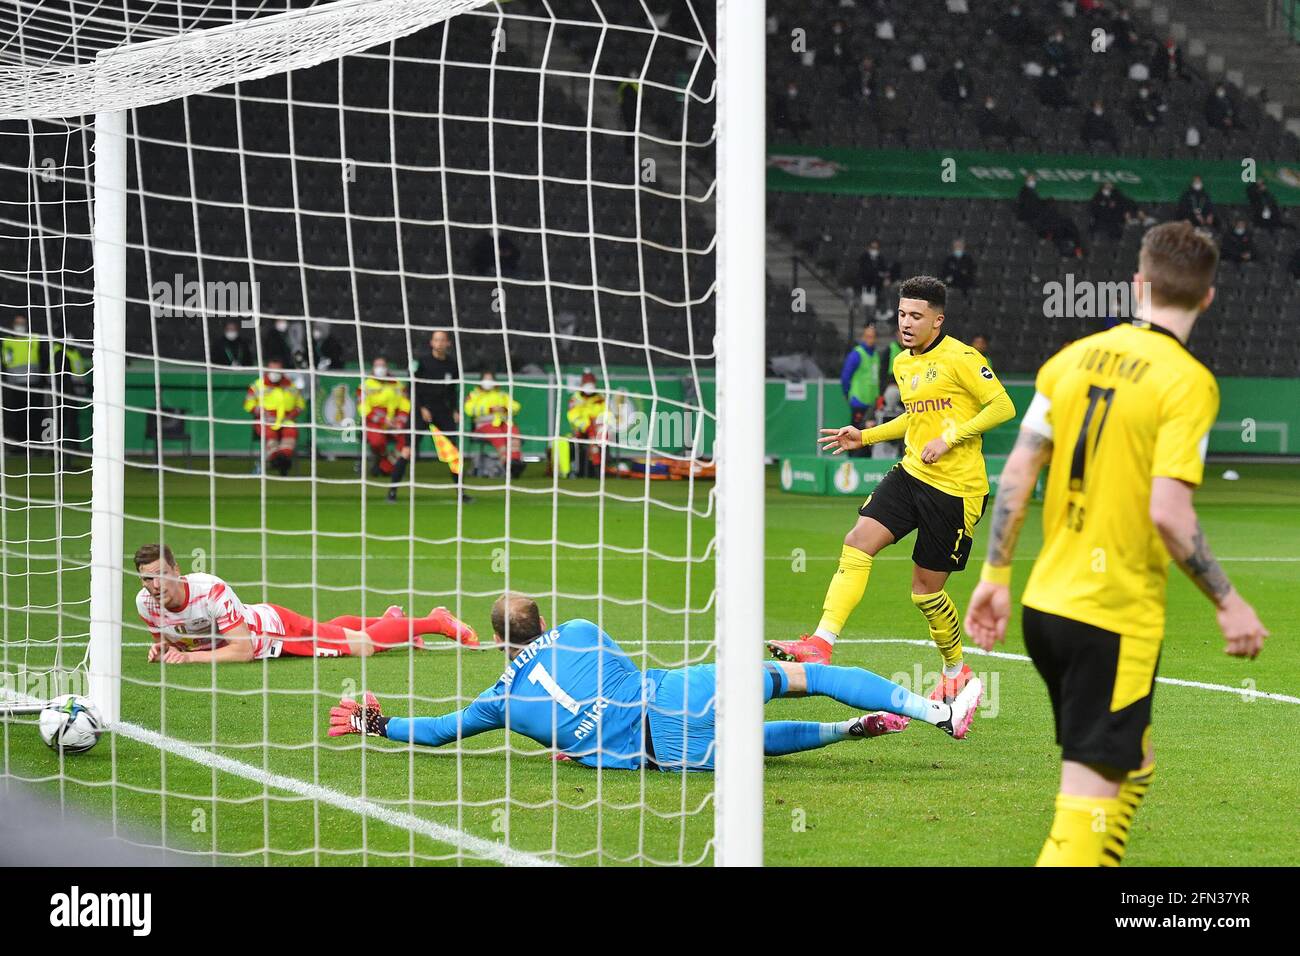 Berlin, Germany. 13th May, 2021. goal um 0-3 by Jadon SANCHO (Borussia Dortmund), action, goal shot versus goalwart Peter GULACSI (L), 78th DFB Pokal final, RB Leipzig (L) - Borussia Dortmund (DO) in the Olympiastadion in Berlin/Germany on 13.05. 2021. ## DFL/DFB regulations prohibit any use of photographs as image sequences and/or quasi-video ## | usage worldwide Credit: dpa/Alamy Live News Stock Photo